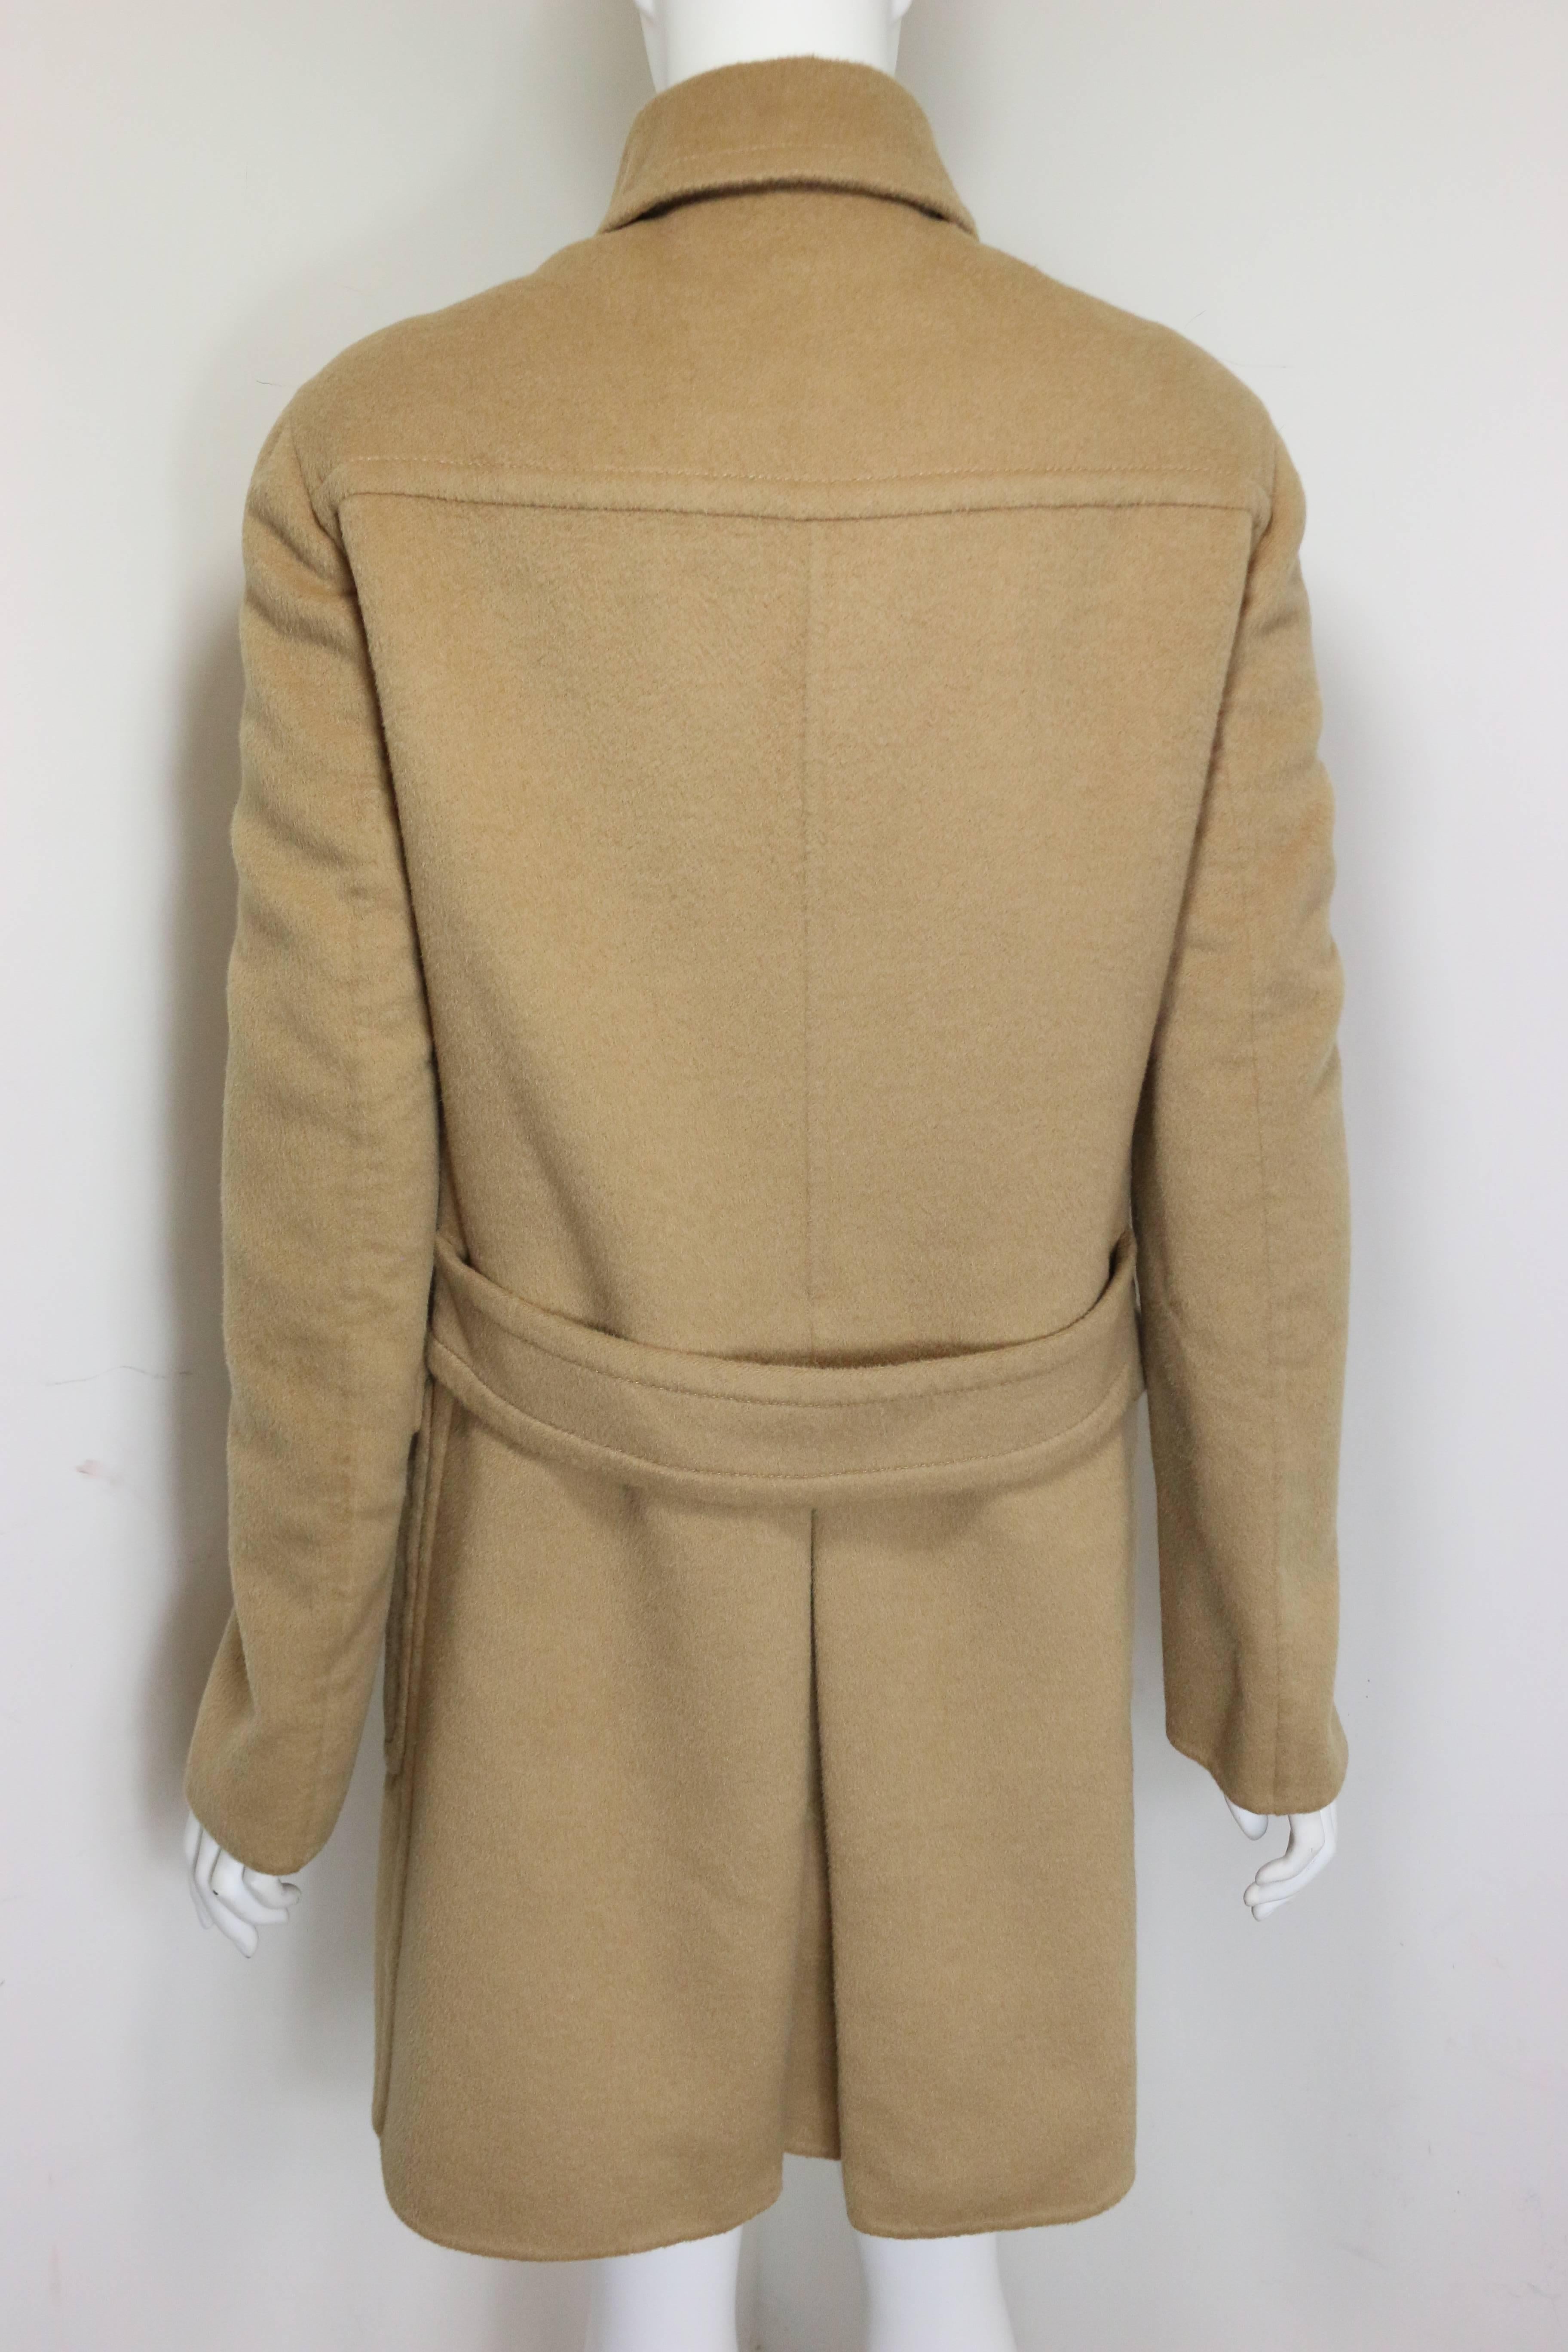 - Vintage Prada camel wool double breasted coat from fall 1996 collection.

- Featuring eight front buttons fastening, two flap pockets with buttons, and a back waist strap. 

- 52% Wool, 48% Angora Goat Hair. 

- Size 44 Italy. 